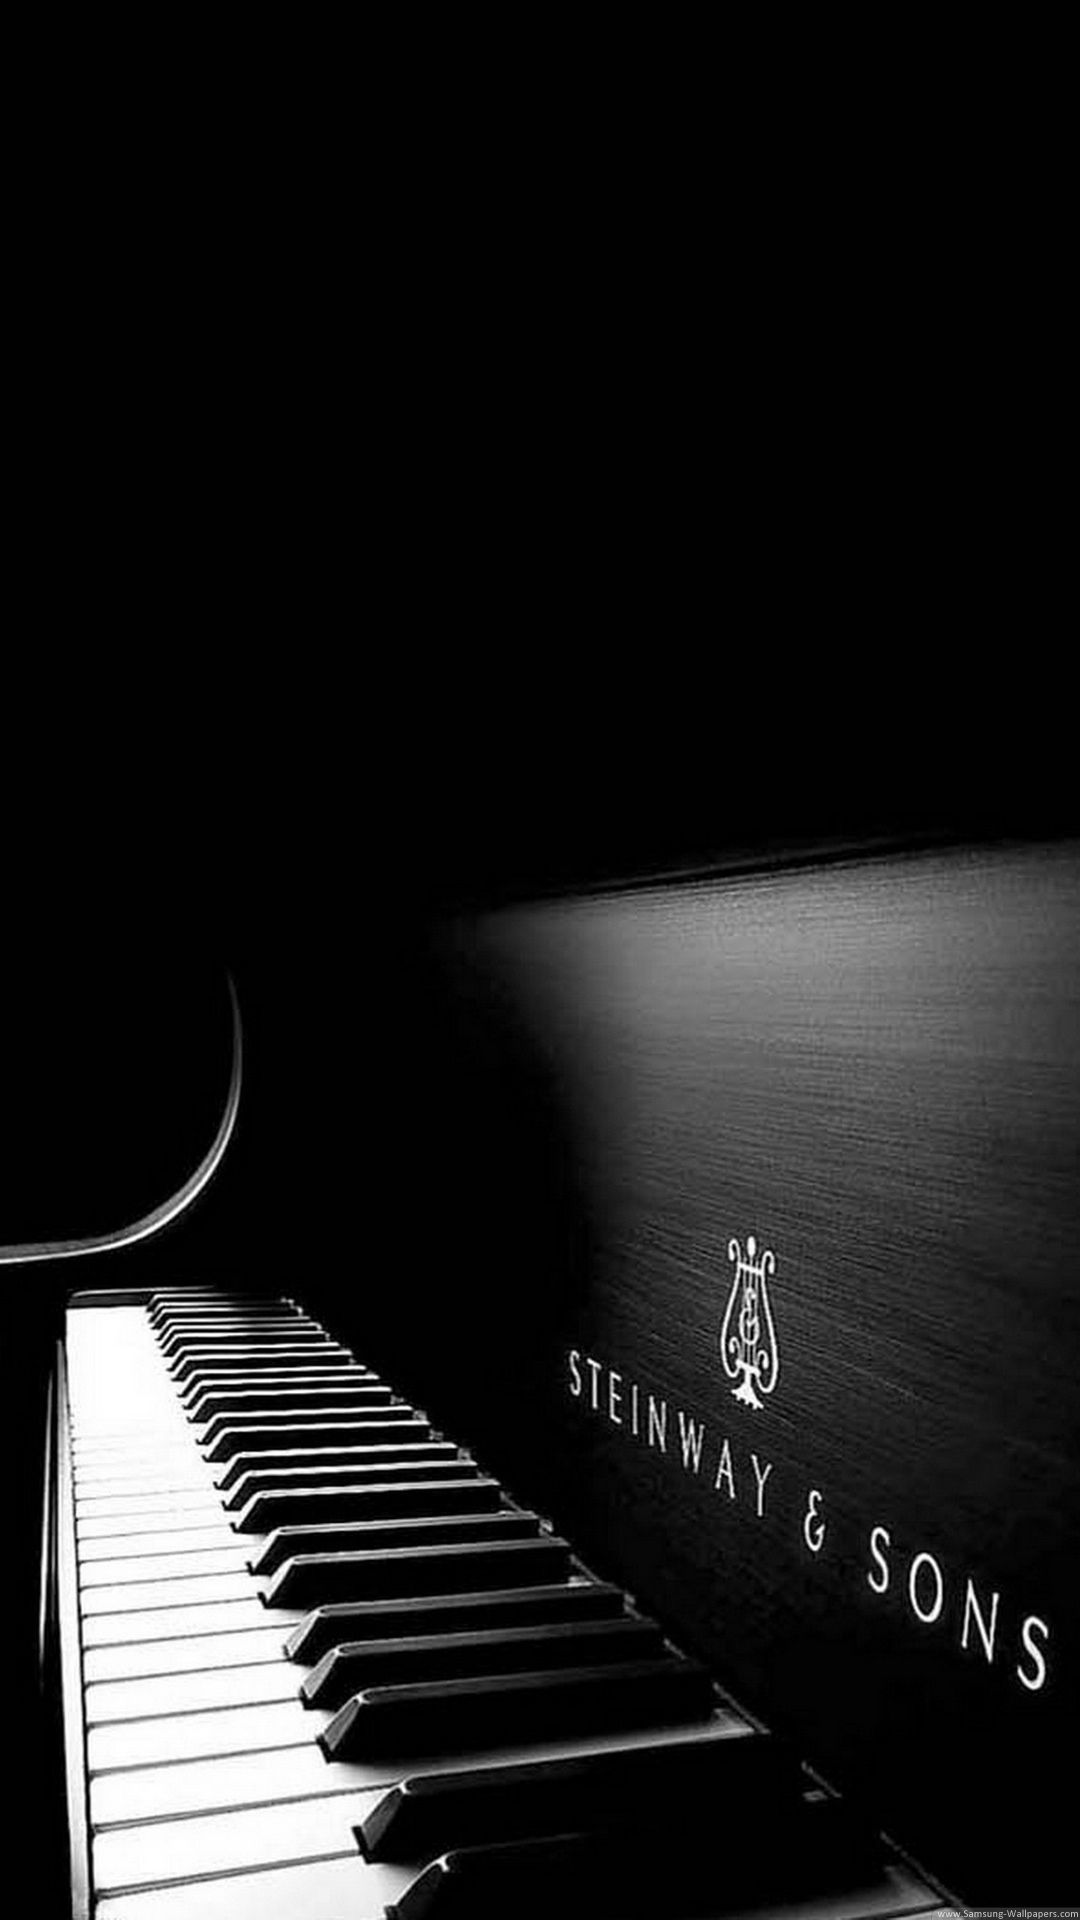 The Girl Playing Piano Mobile Phone Wallpaper Images Free Download on  Lovepik  400451149